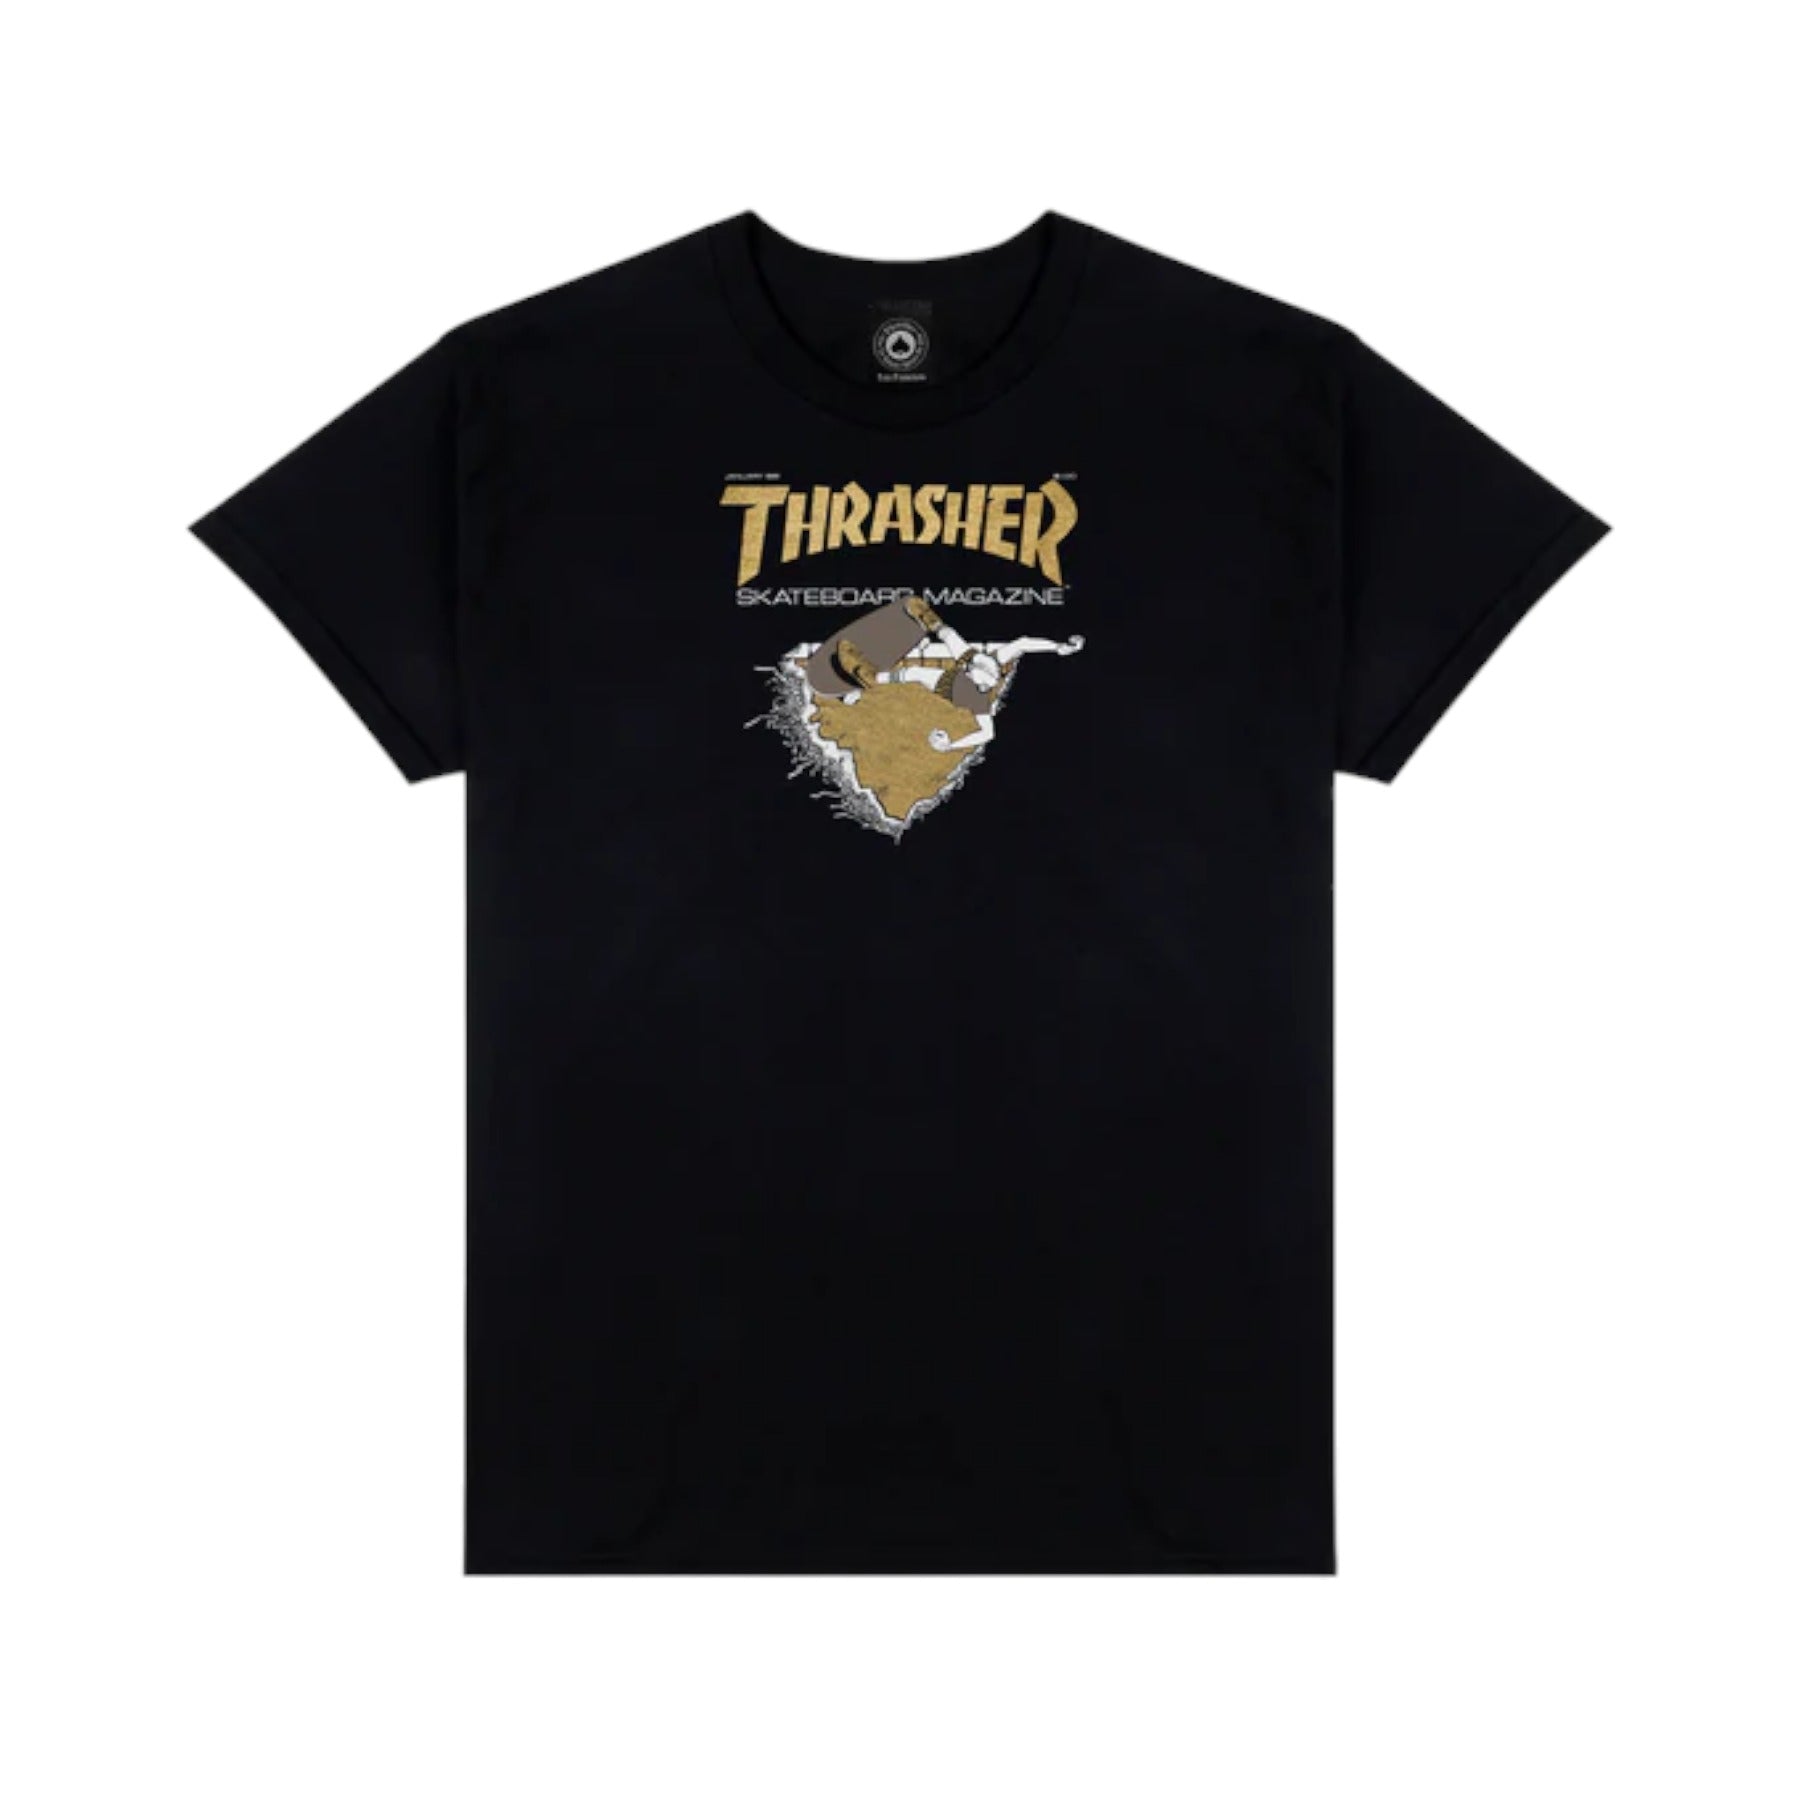 Thrasher First Cover S/S Tee - Black